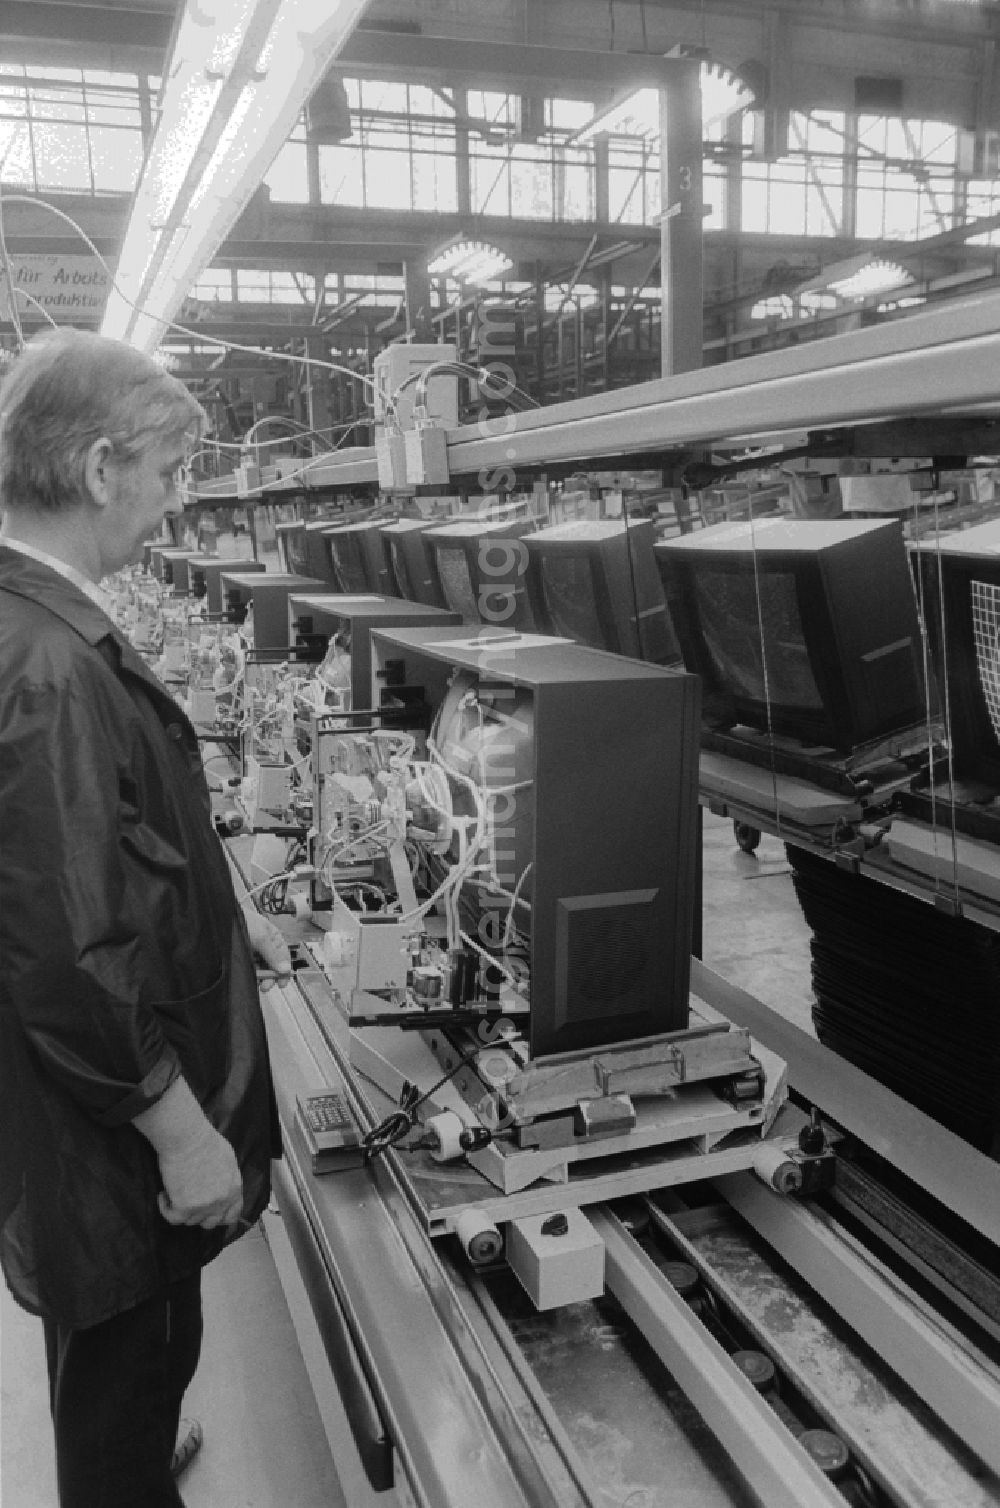 GDR image archive: Staßfurt - Employees in manufacturing nationally owned enterprise televisions Stassfurt in Stassfurt in the state of Saxony-Anhalt on the territory of the former GDR, German Democratic Republic